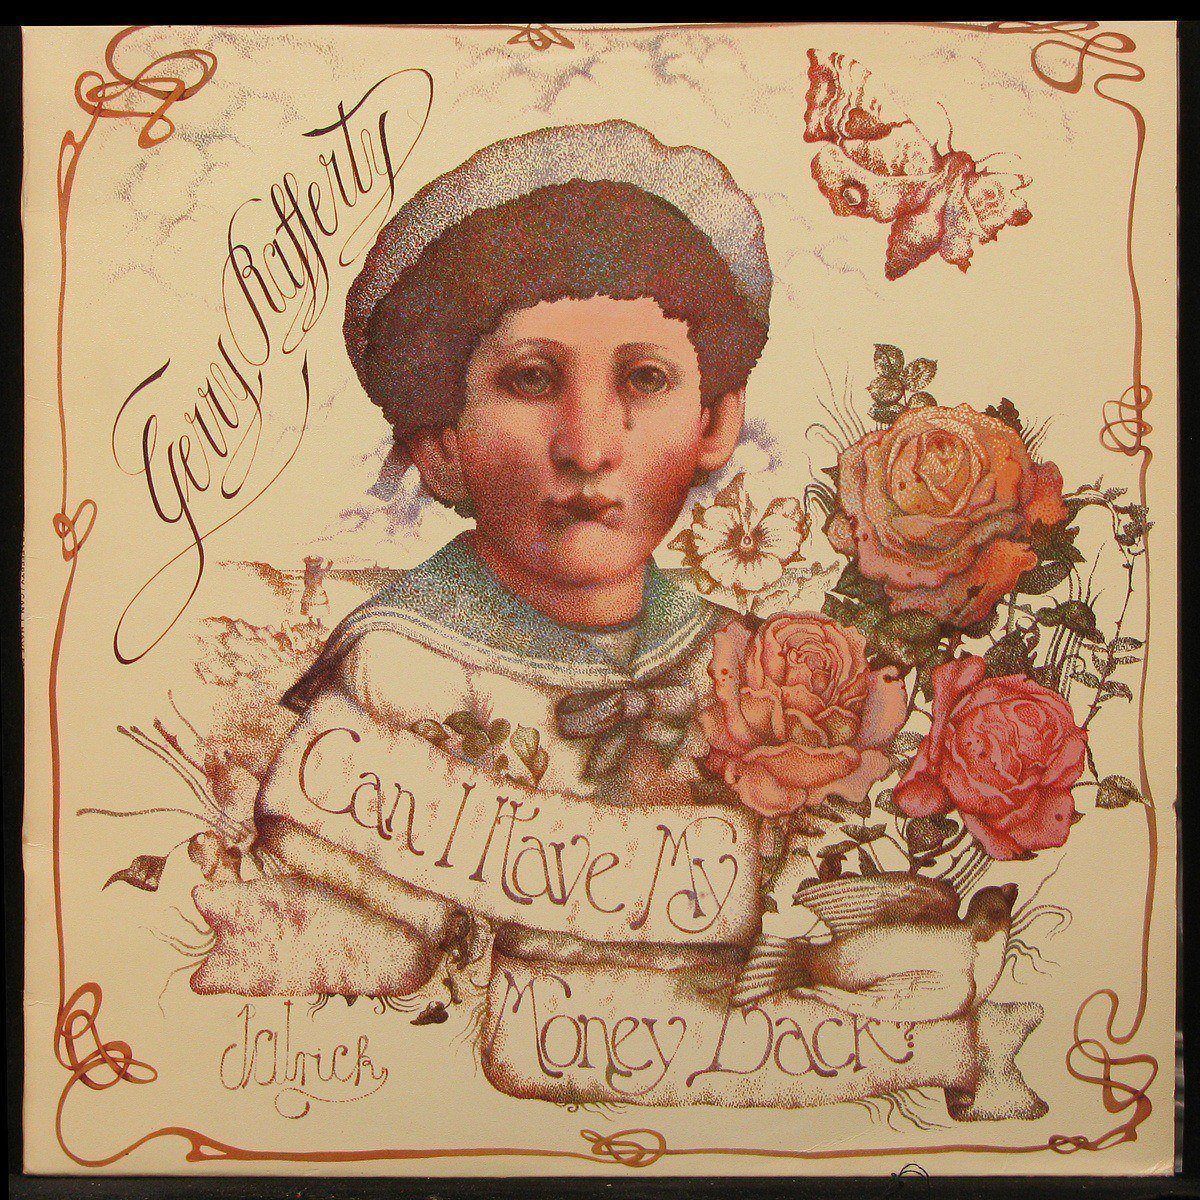 LP Gerry Rafferty — Can I Have My Money Back? фото